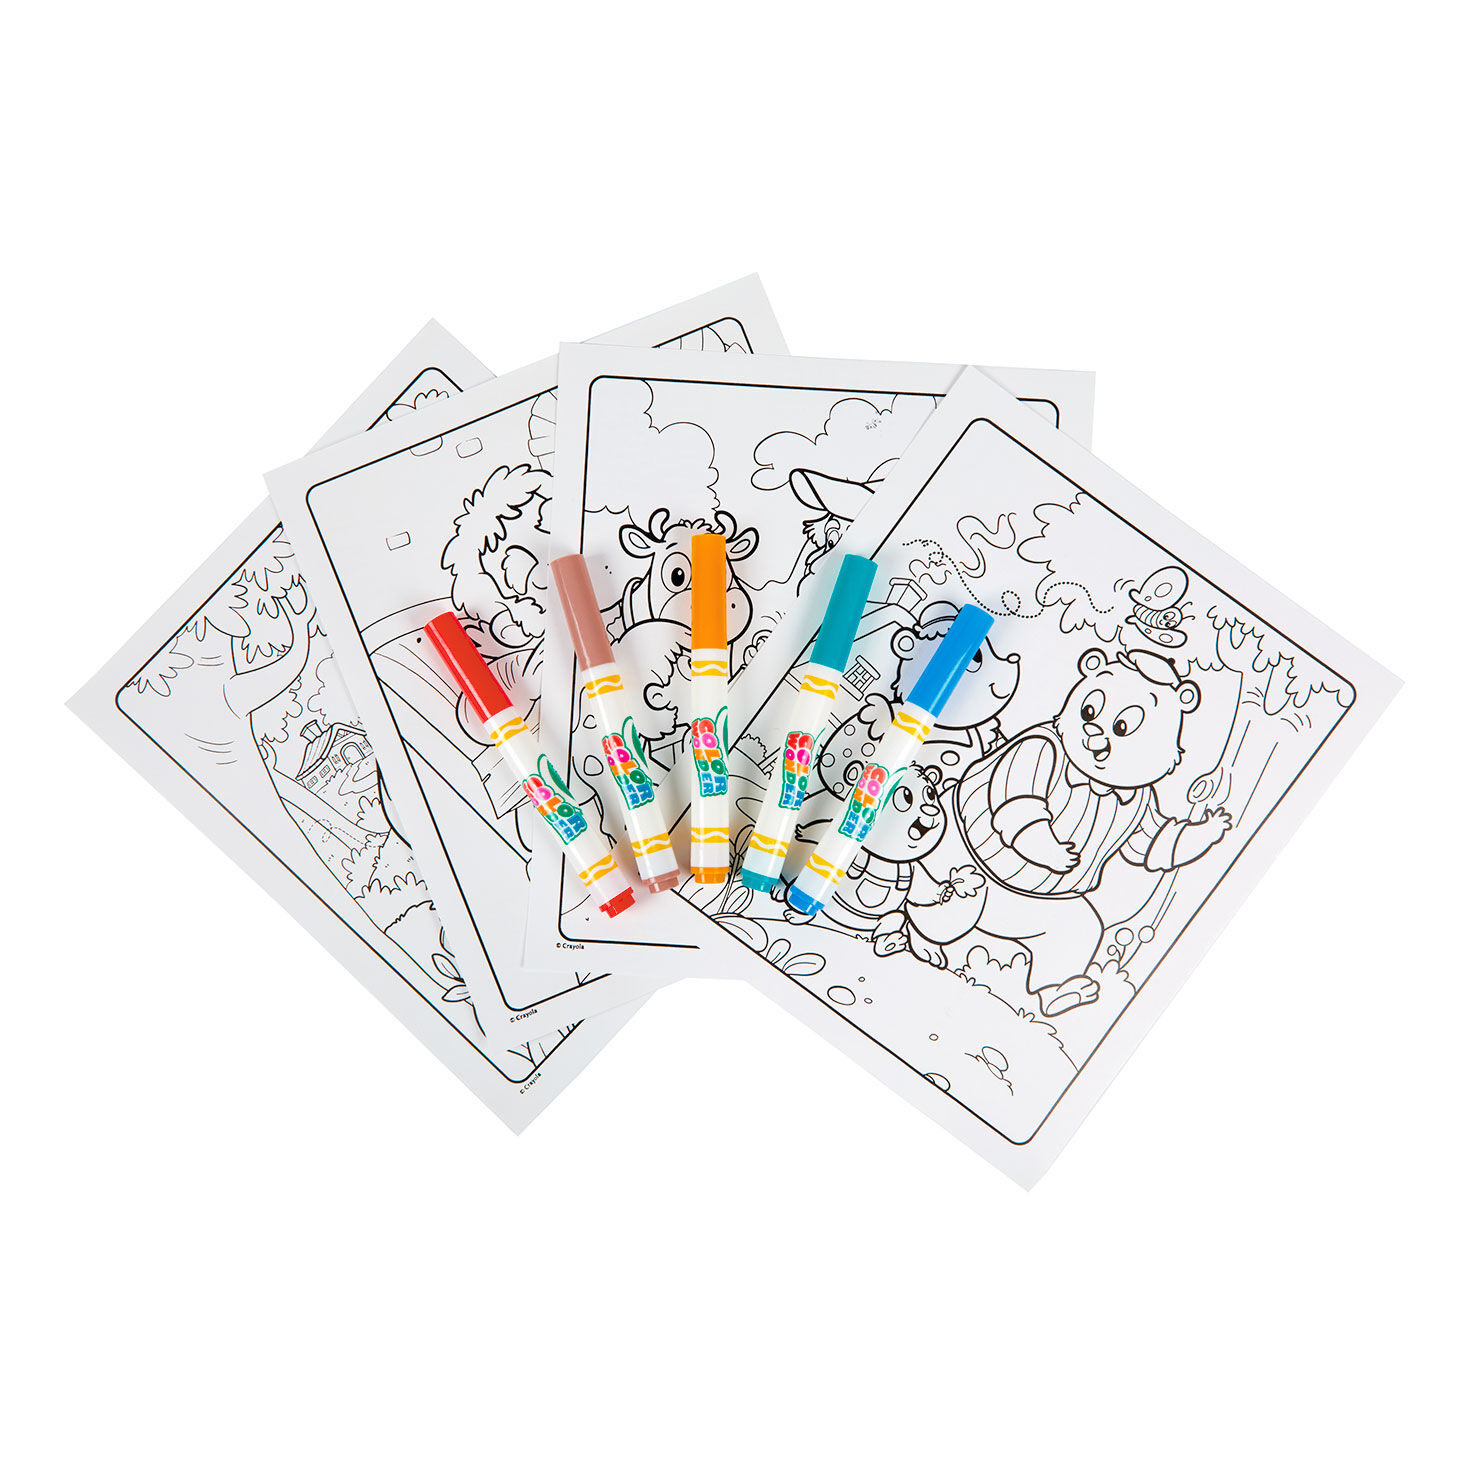 Crayola® Color Wonder Mess-Free Fairytales Markers and Paper Set for only USD 9.99 | Hallmark